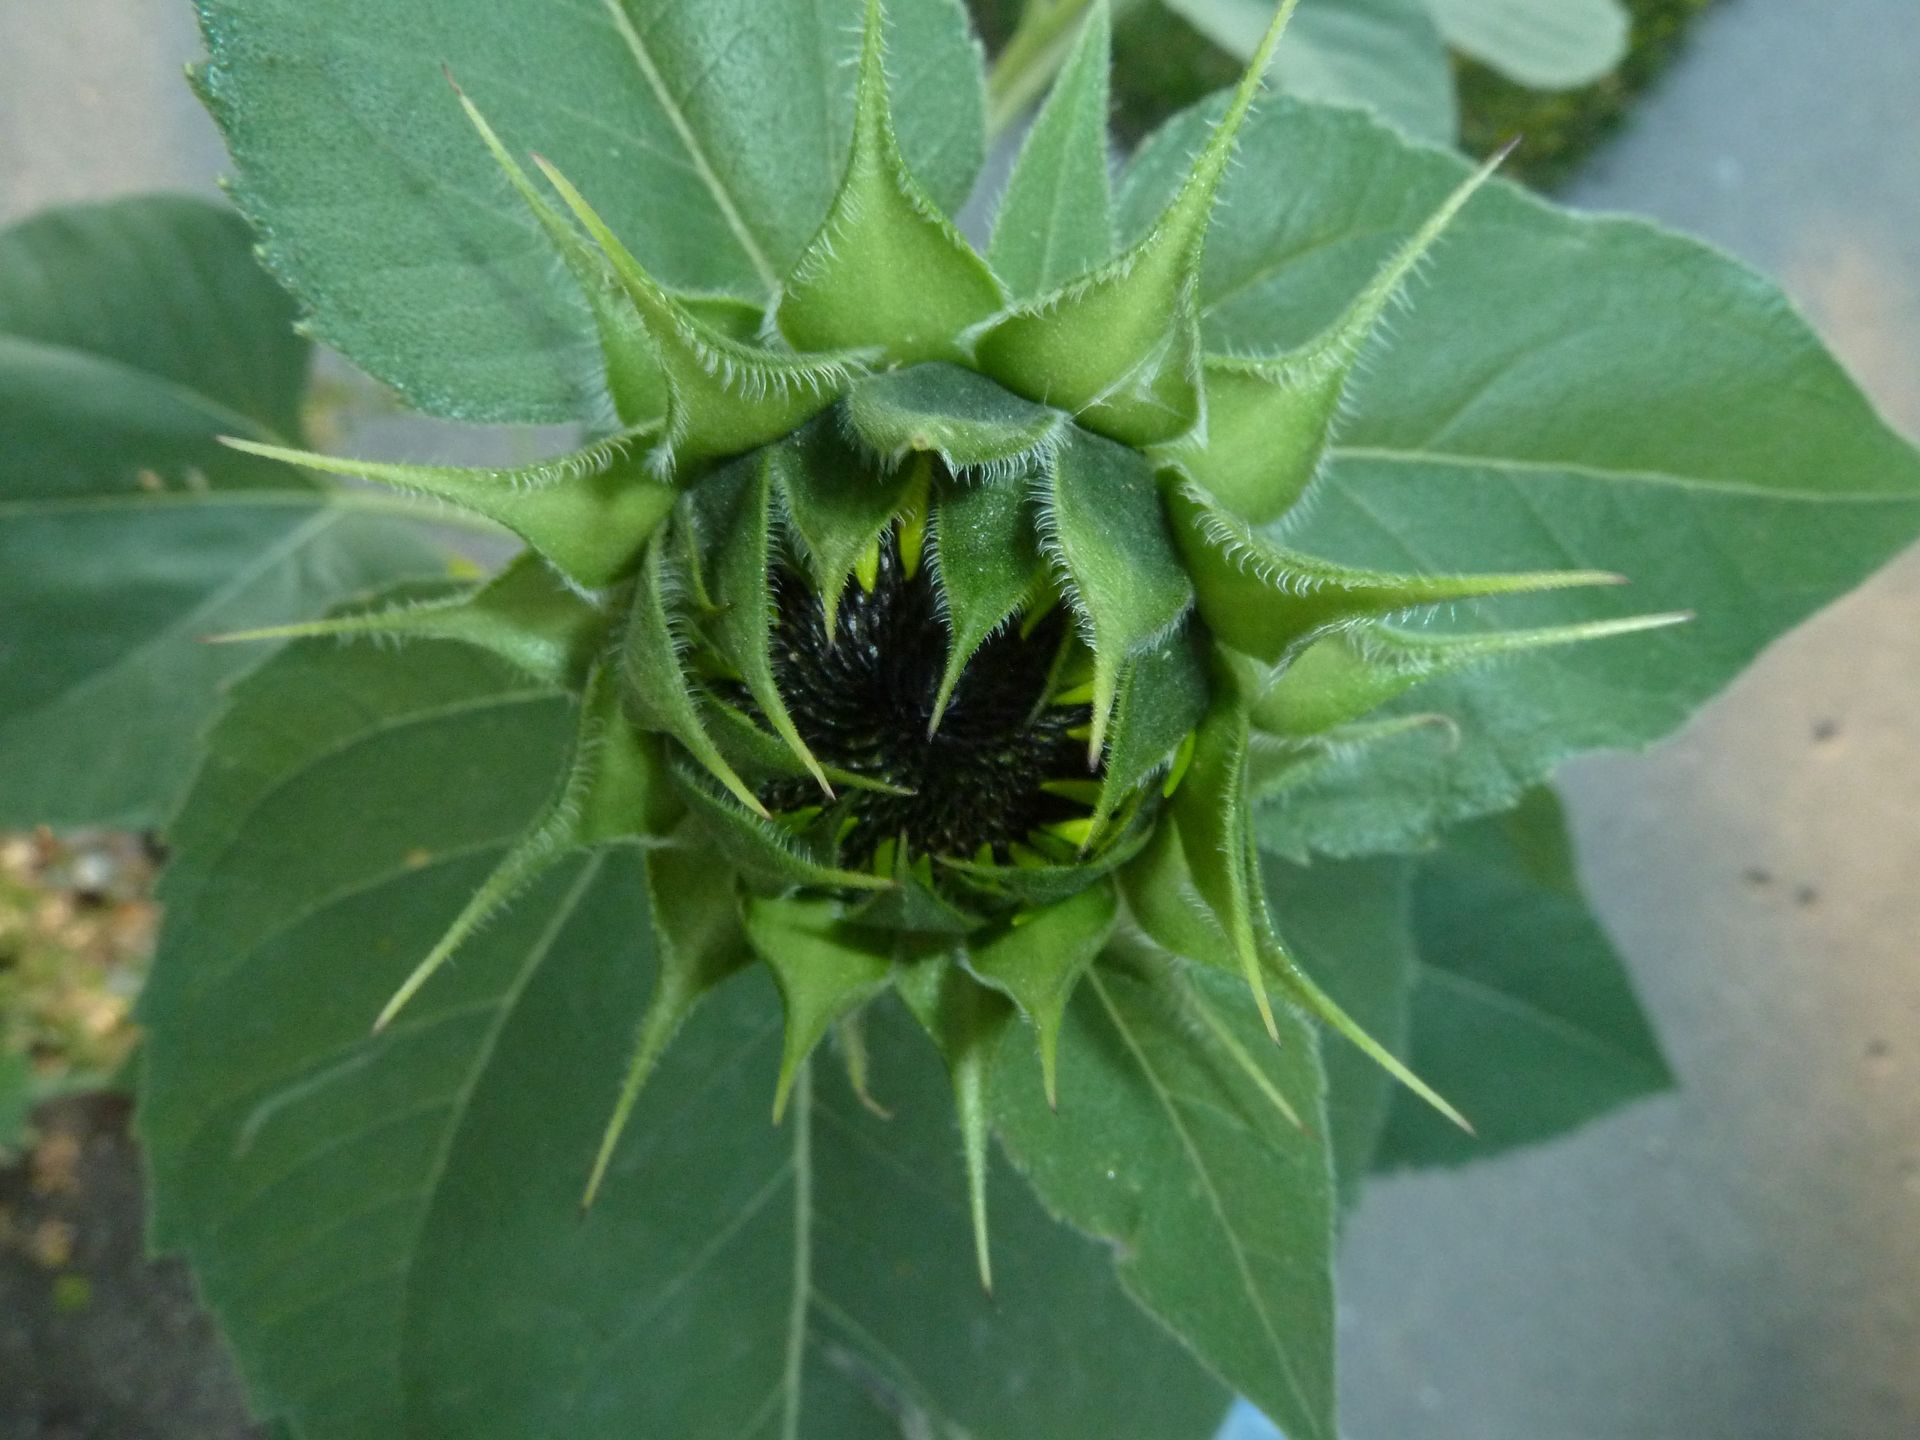 A sunflower before it blooms.